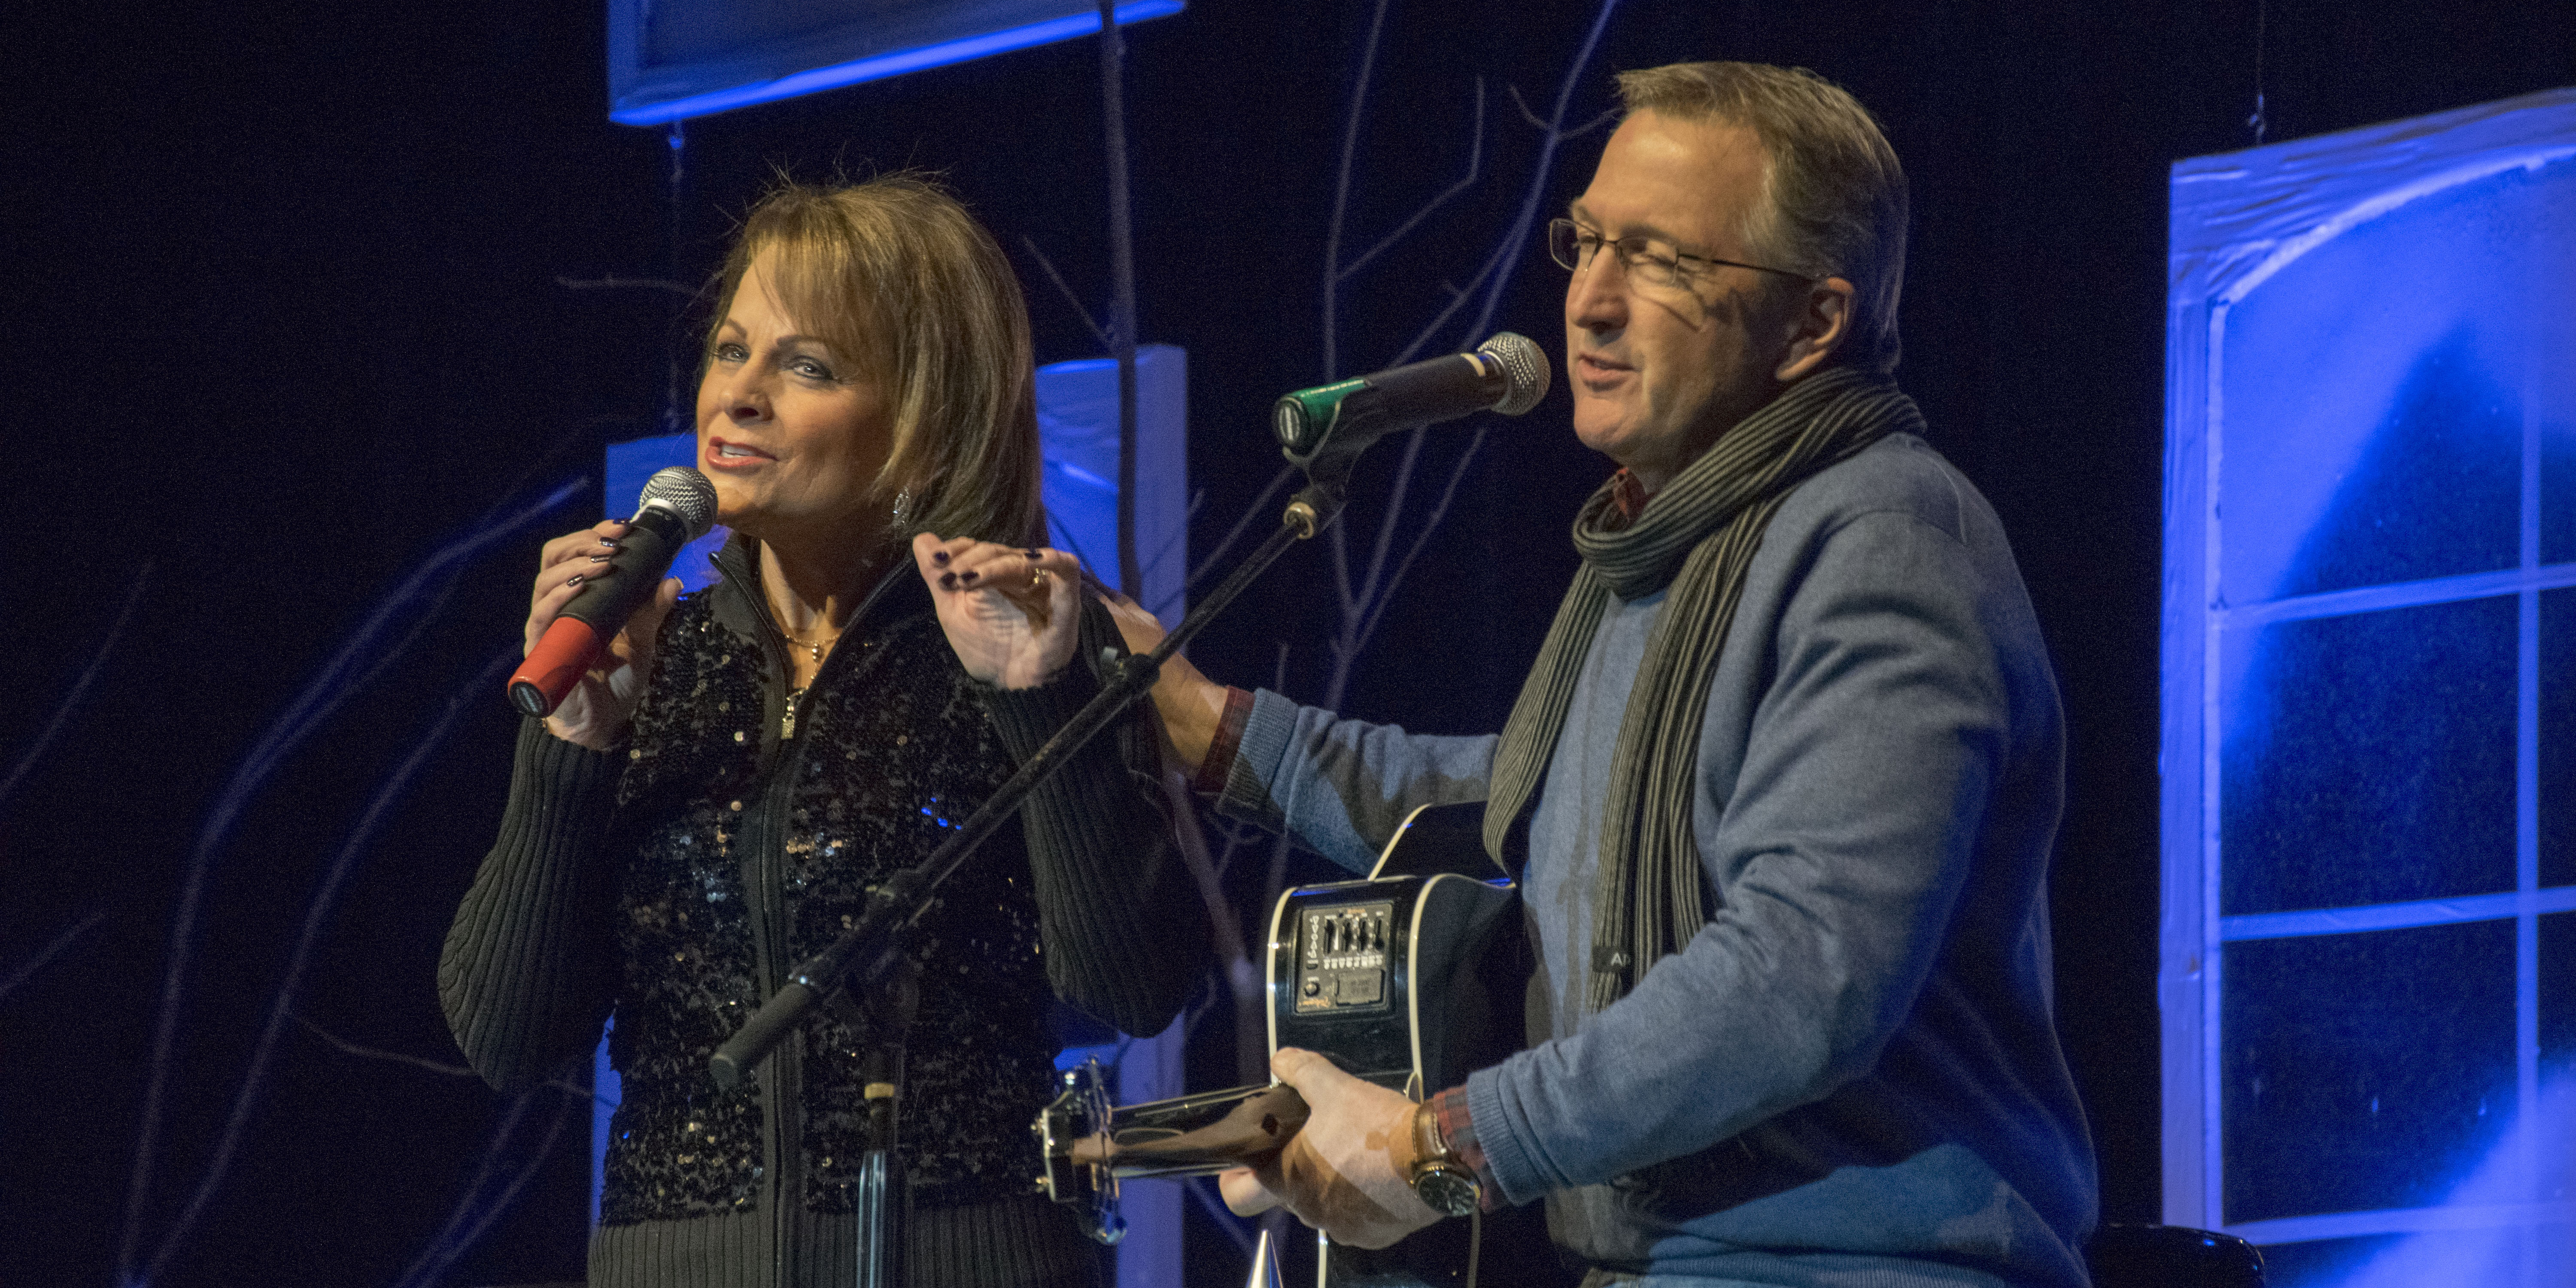 Susie McEntire and her husband Mark Eaton performed A Country Christmas at Lakeview Middle School.